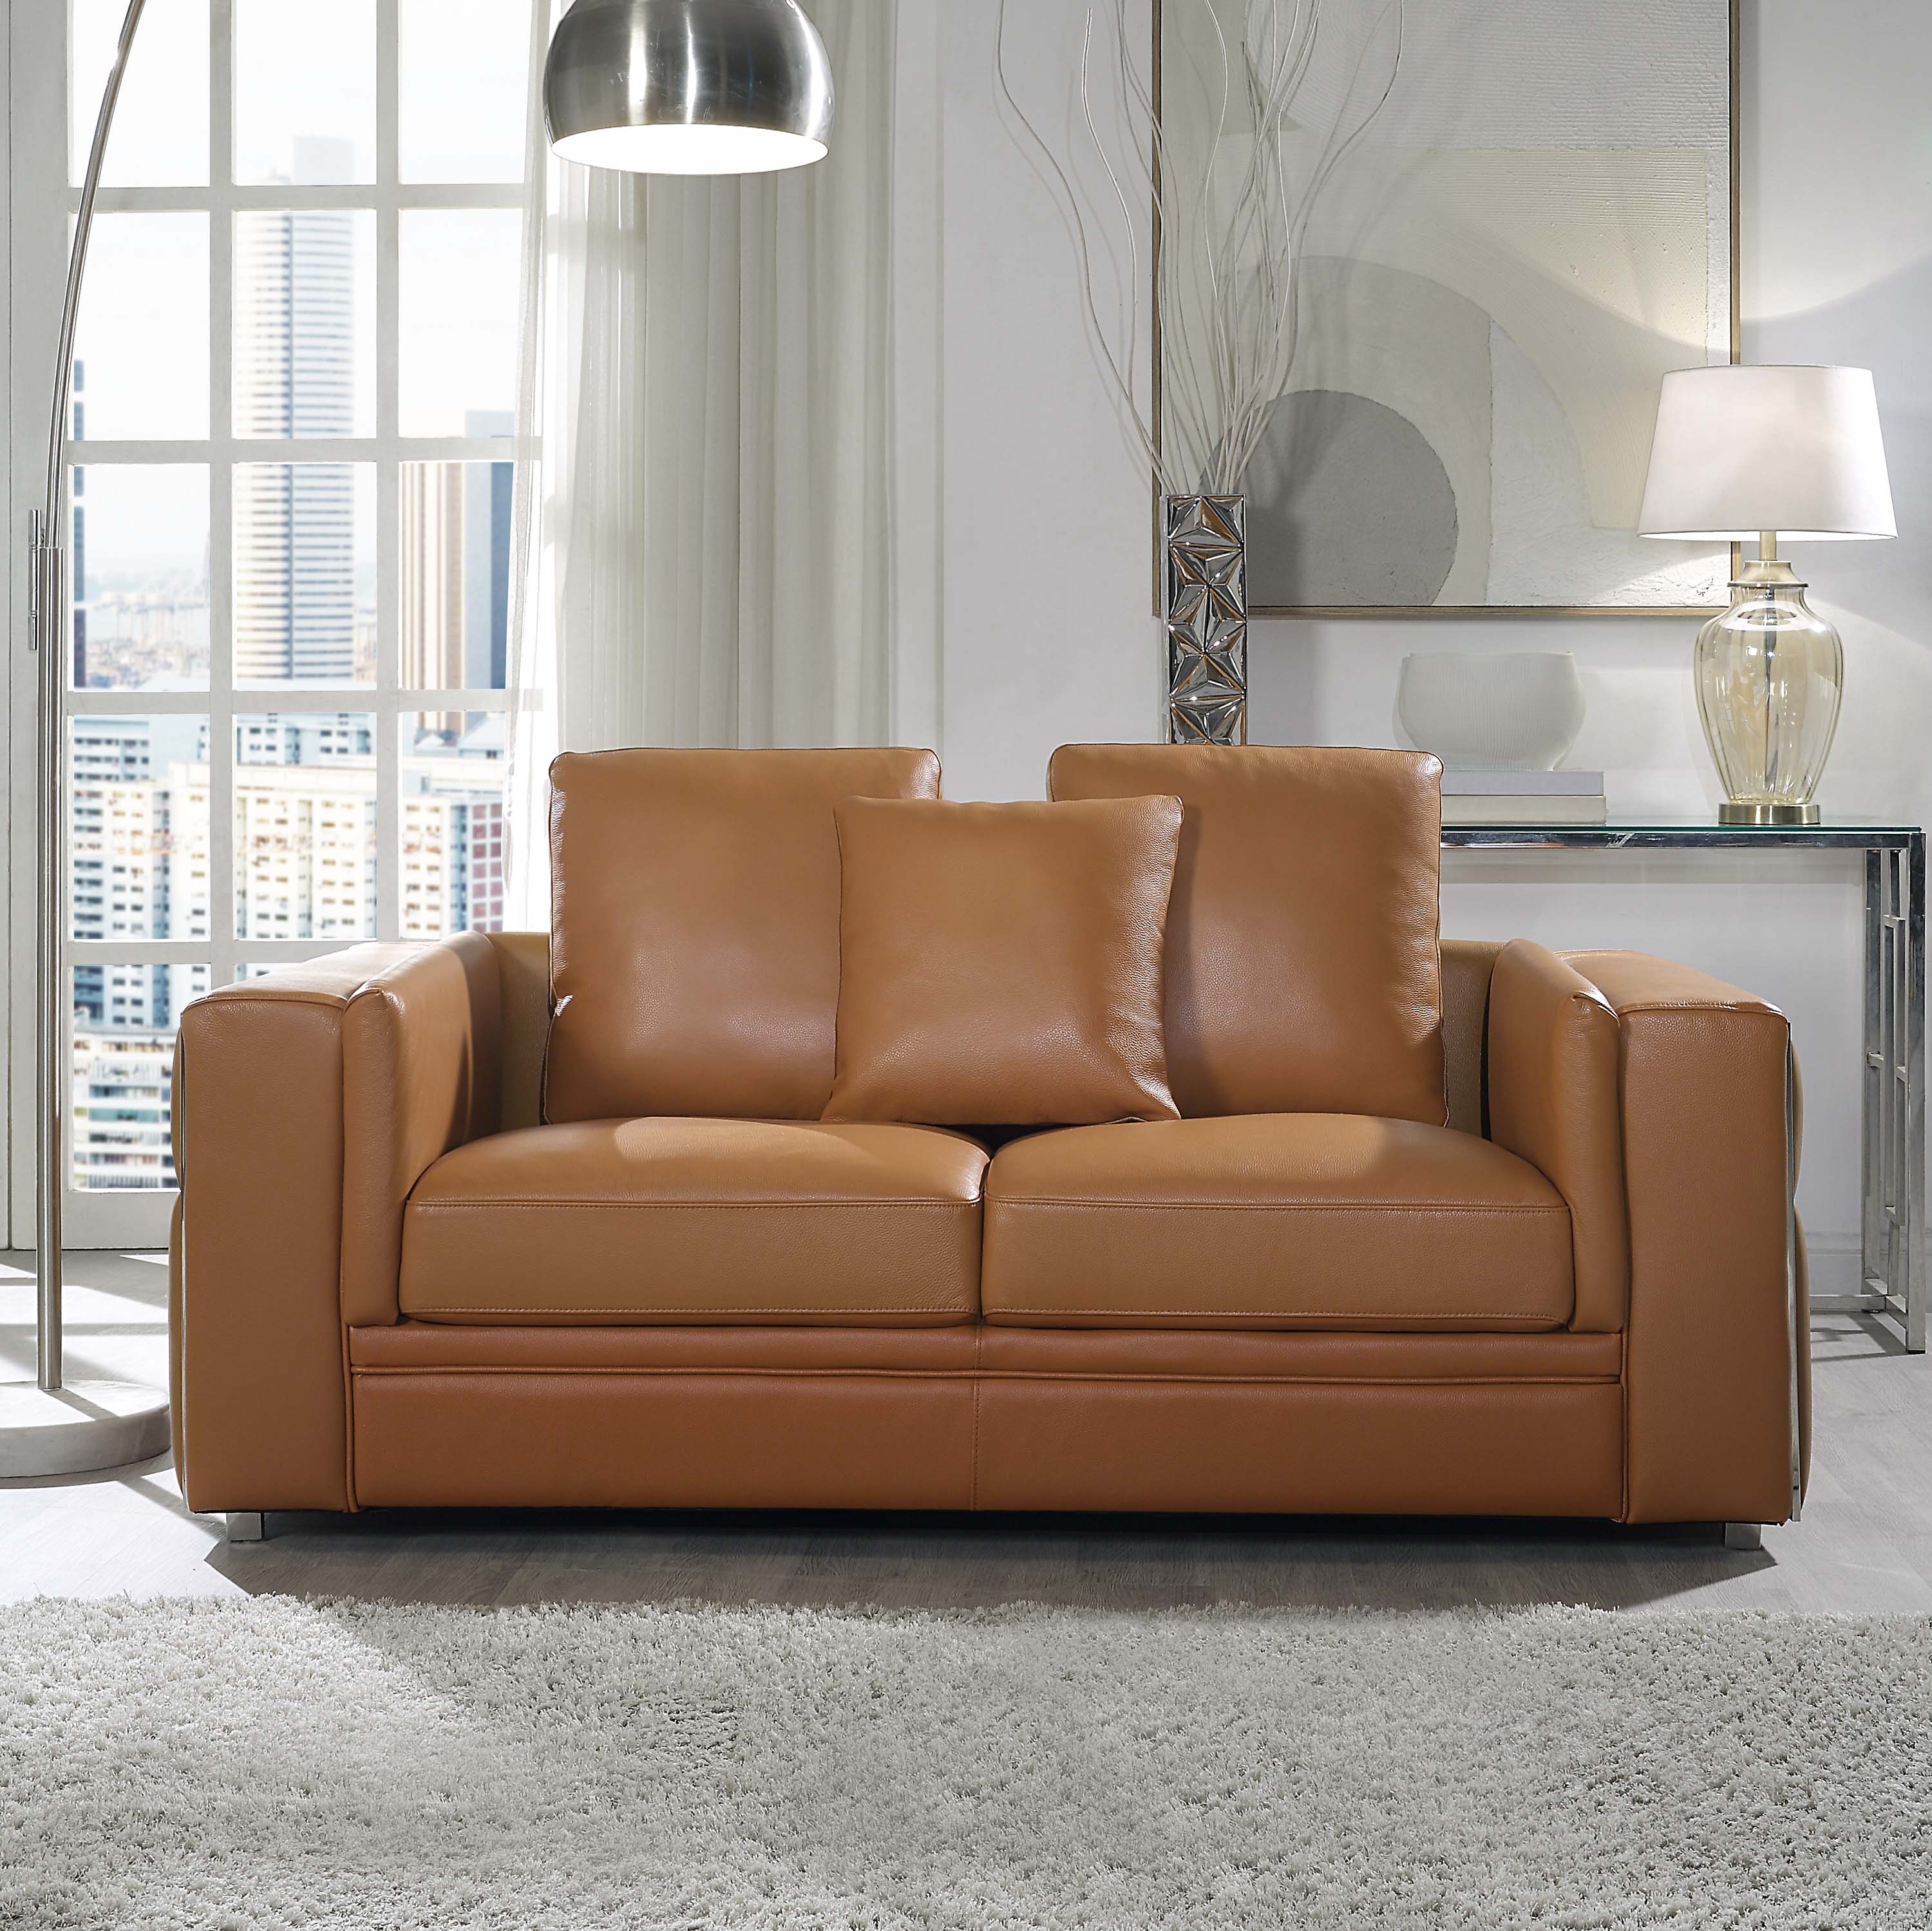 Dovecove Genuine Leather Loveseat Brown